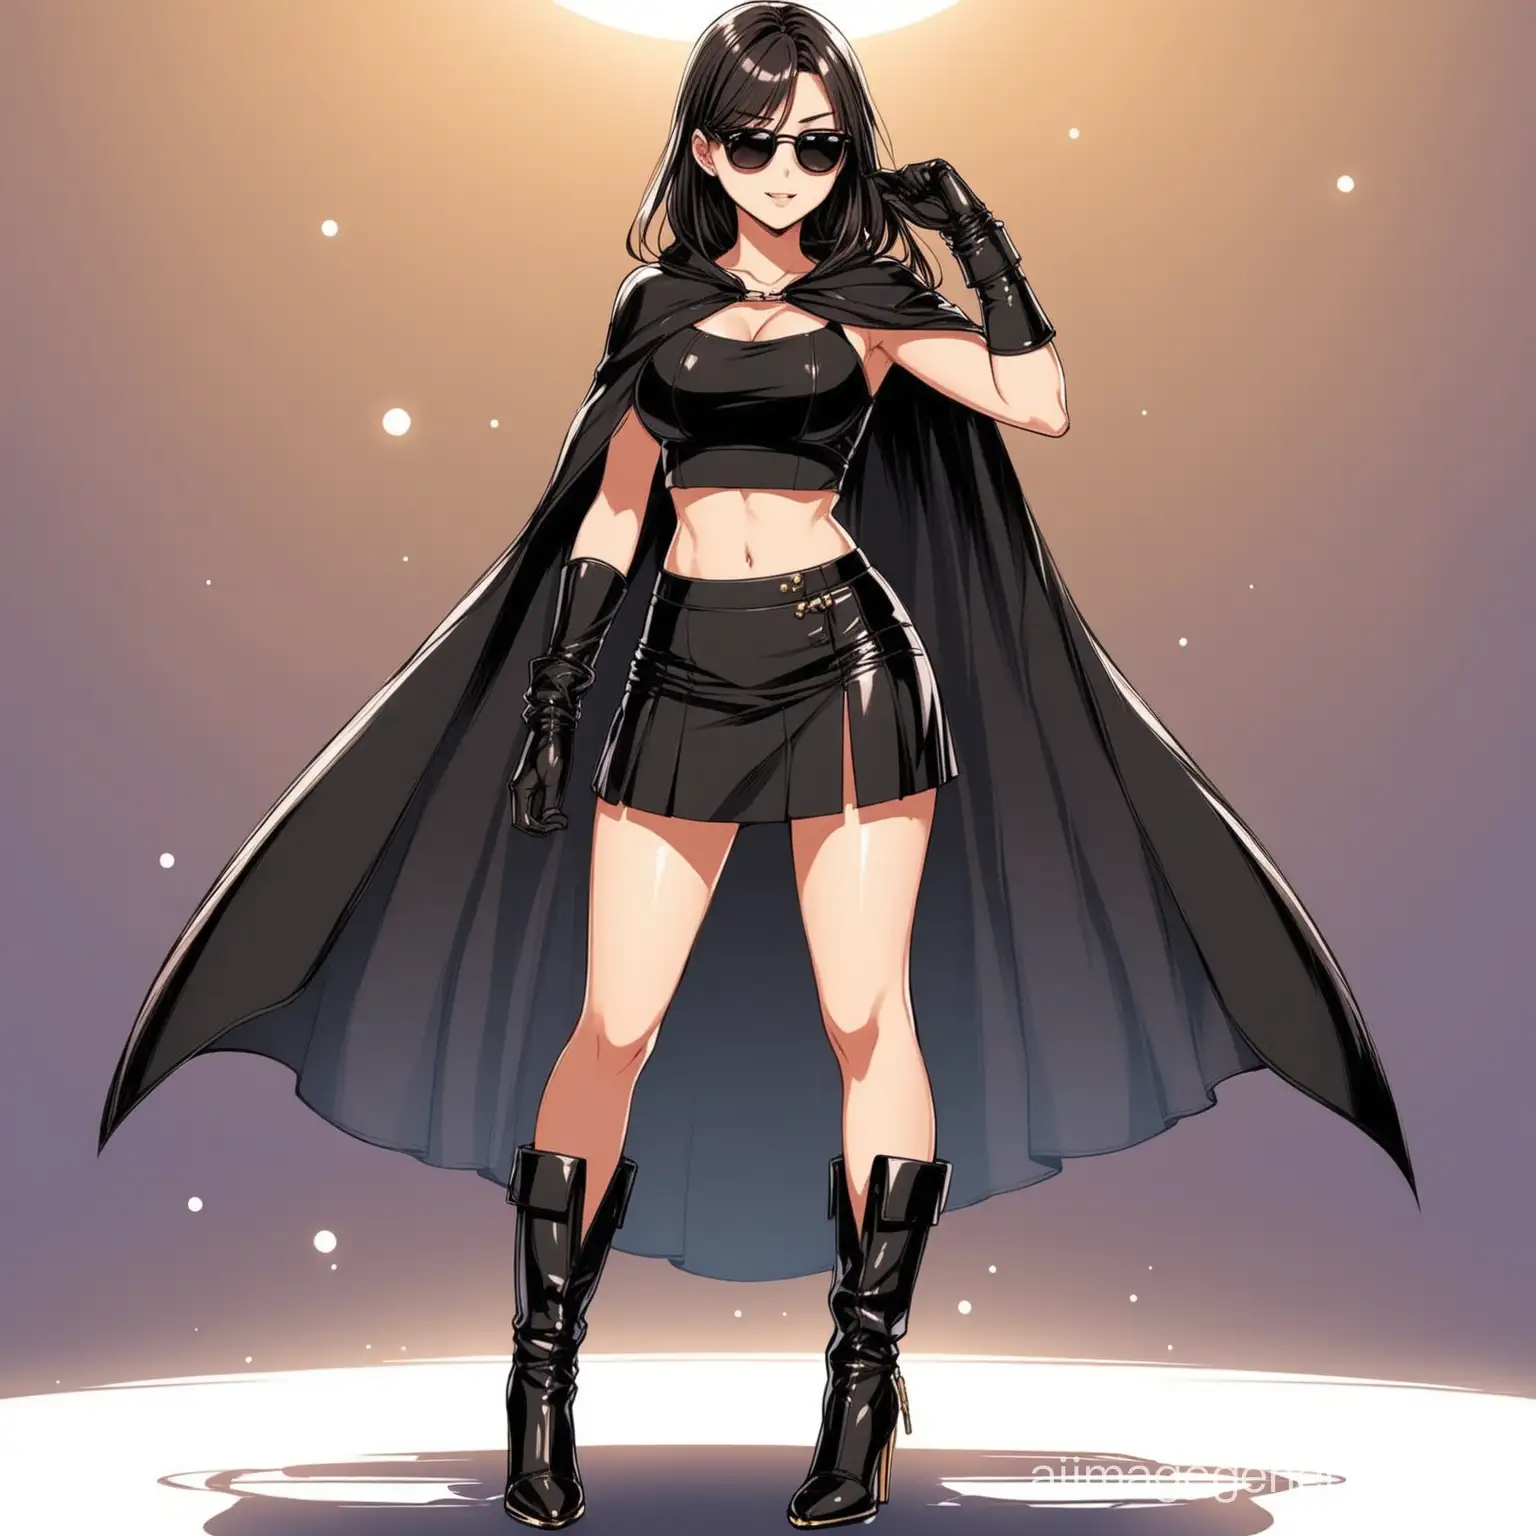 hot anime girl in a cute modern croptop, formal skirt, leather gloves, boots heels and a cape along with a pair of shades